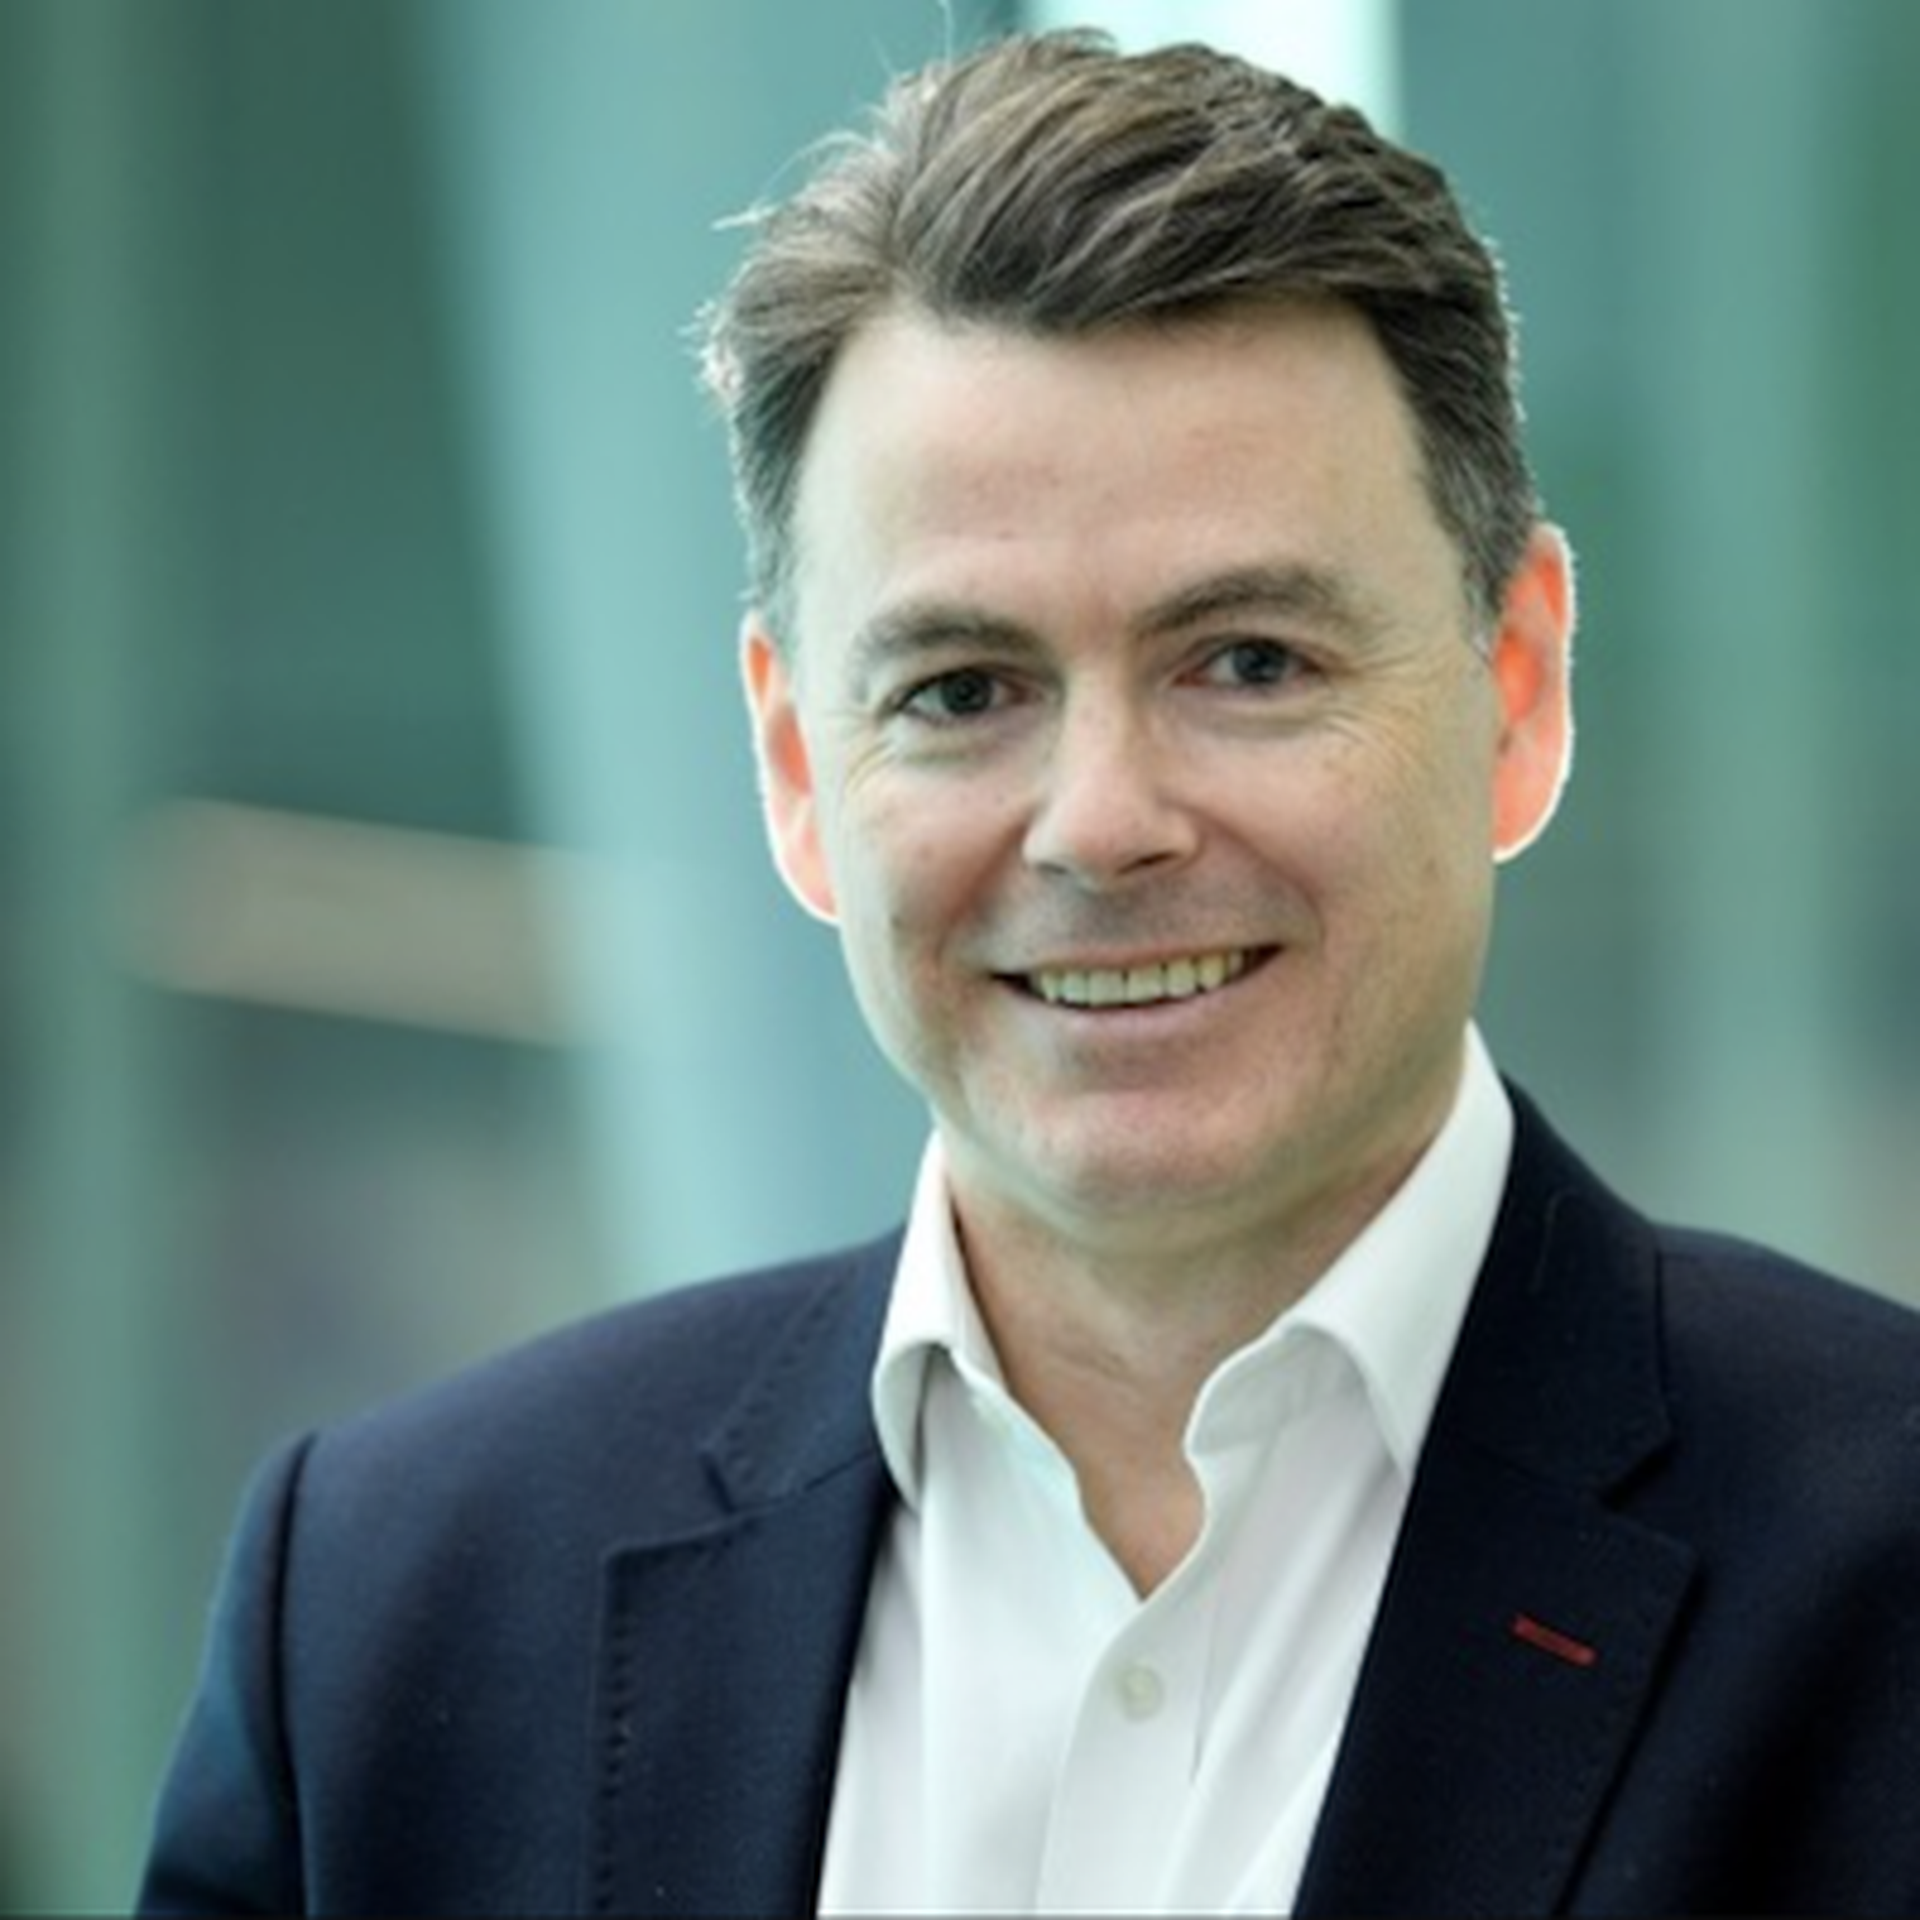 Toby Siddall, Accenture’s Sustainability Services lead in the U.K. and Ireland